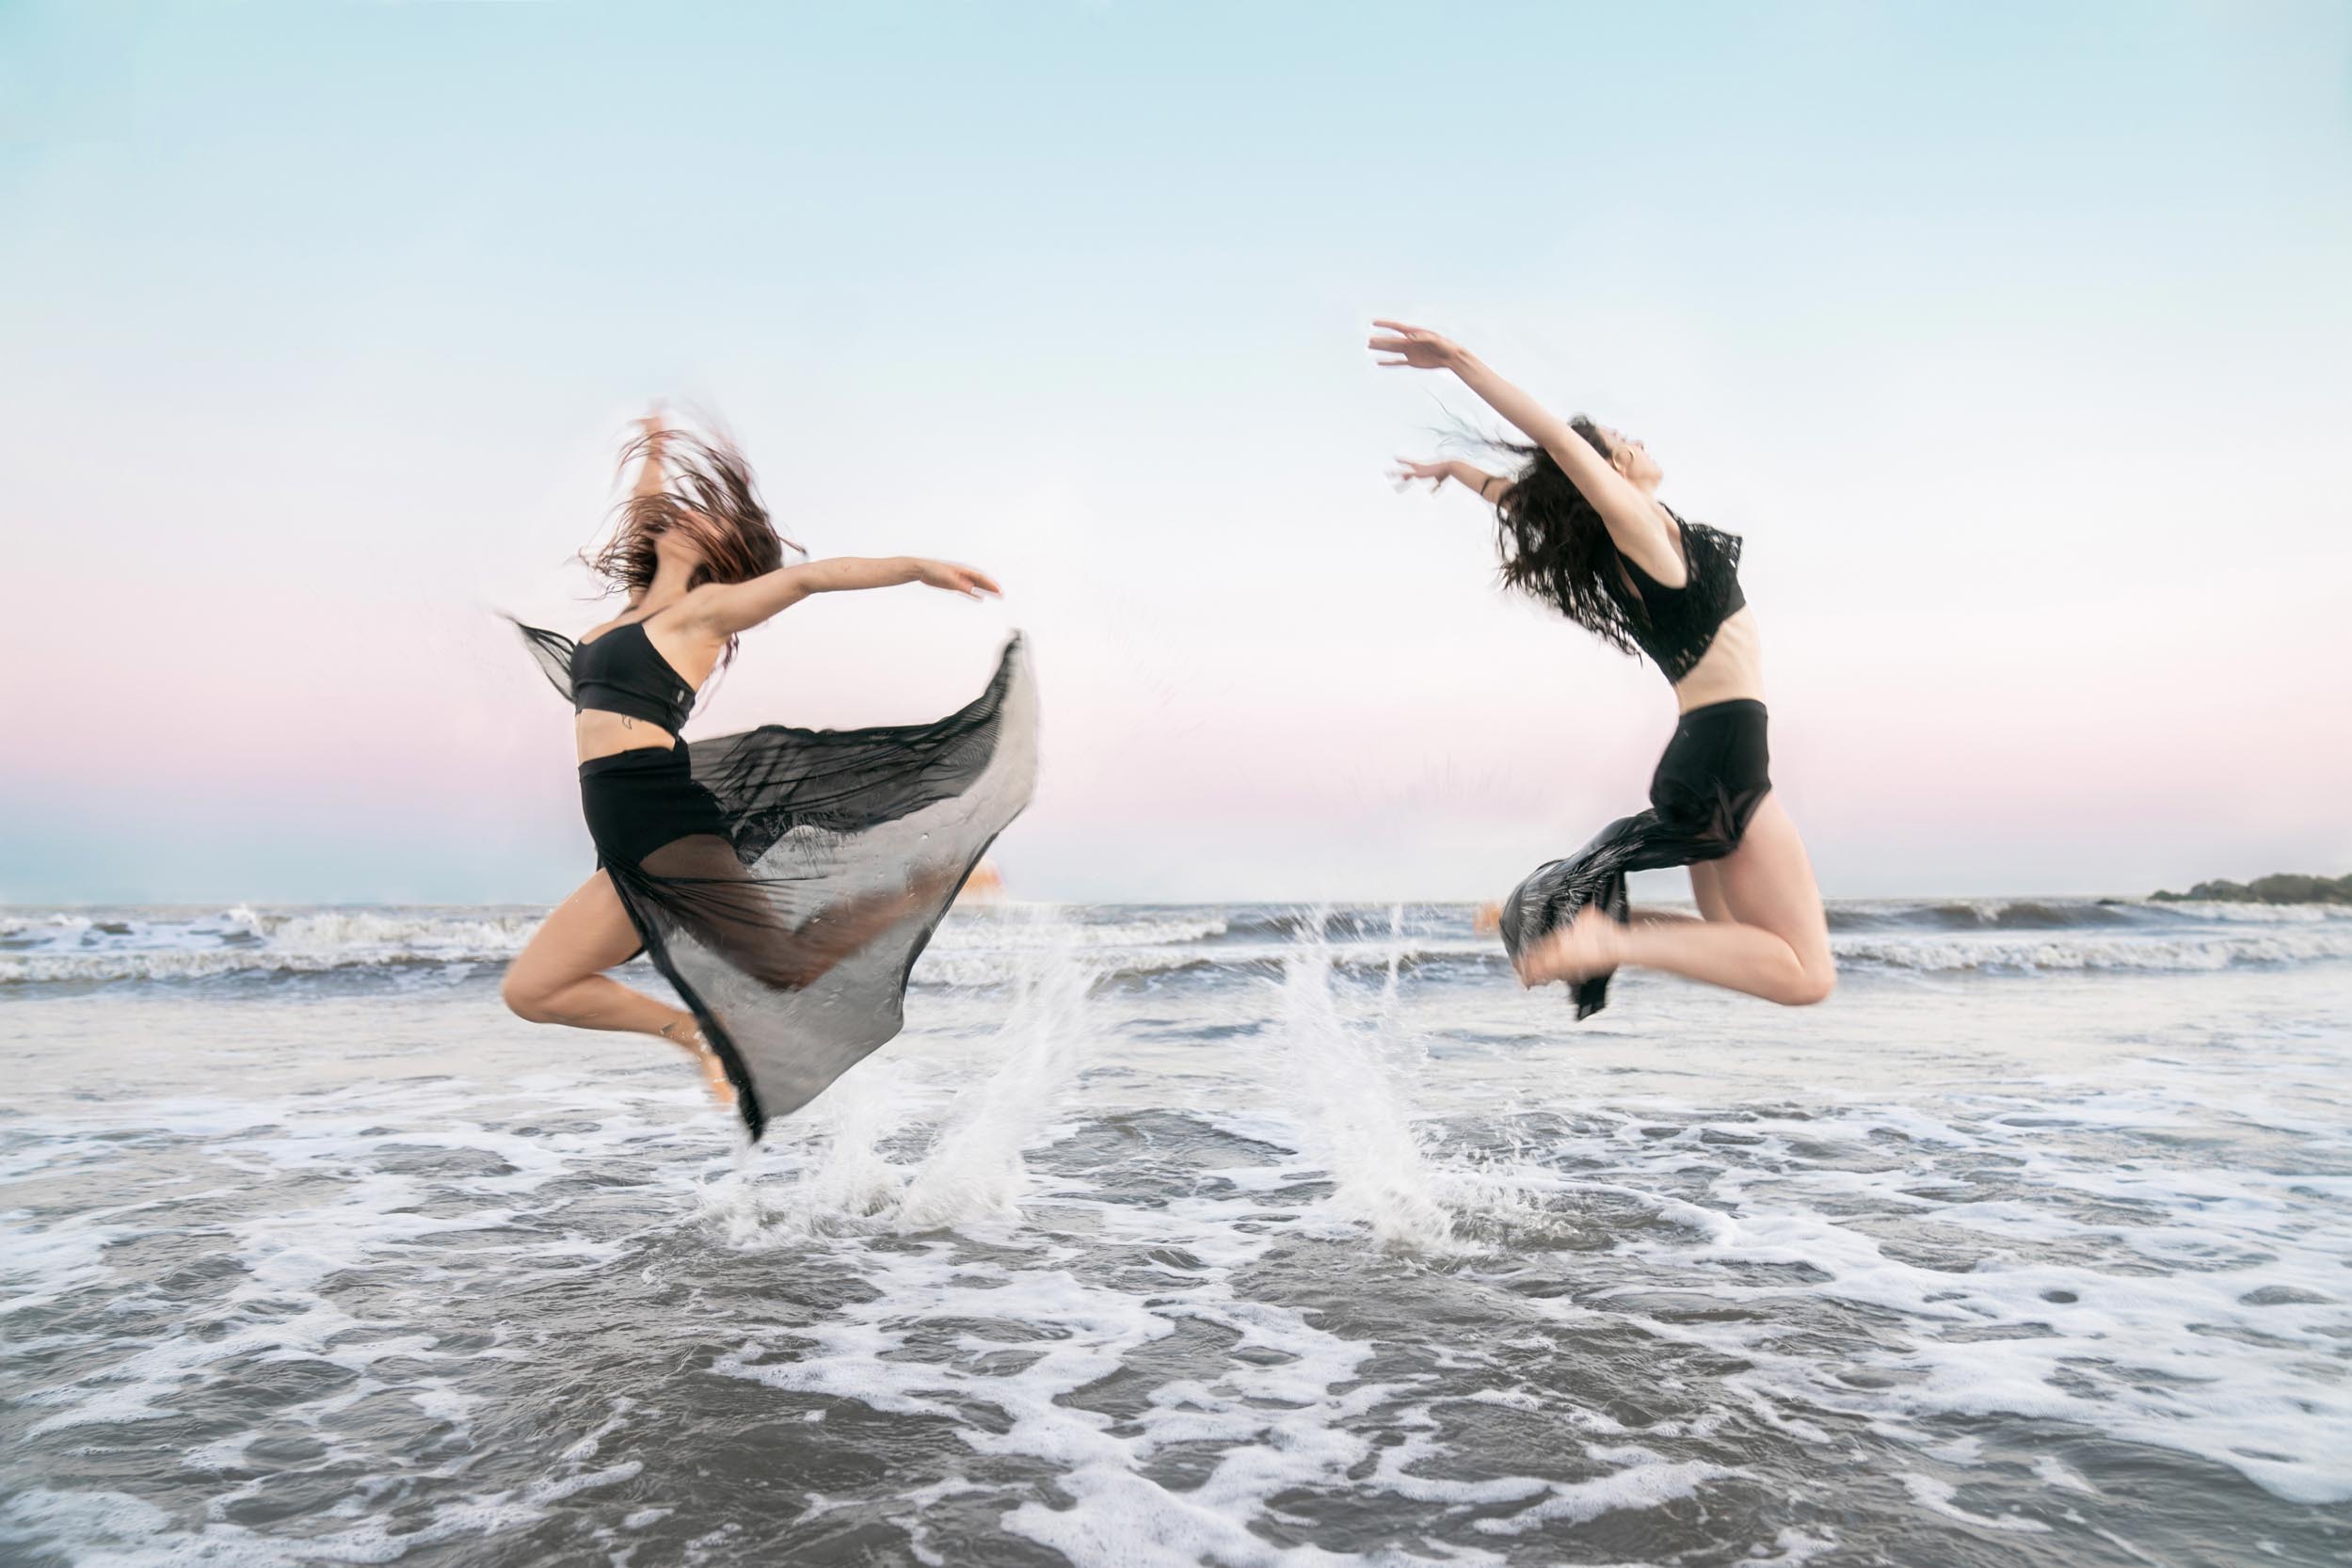 Dancers jumping and performing on the beach at sunset along Louisiana Gulf Coast